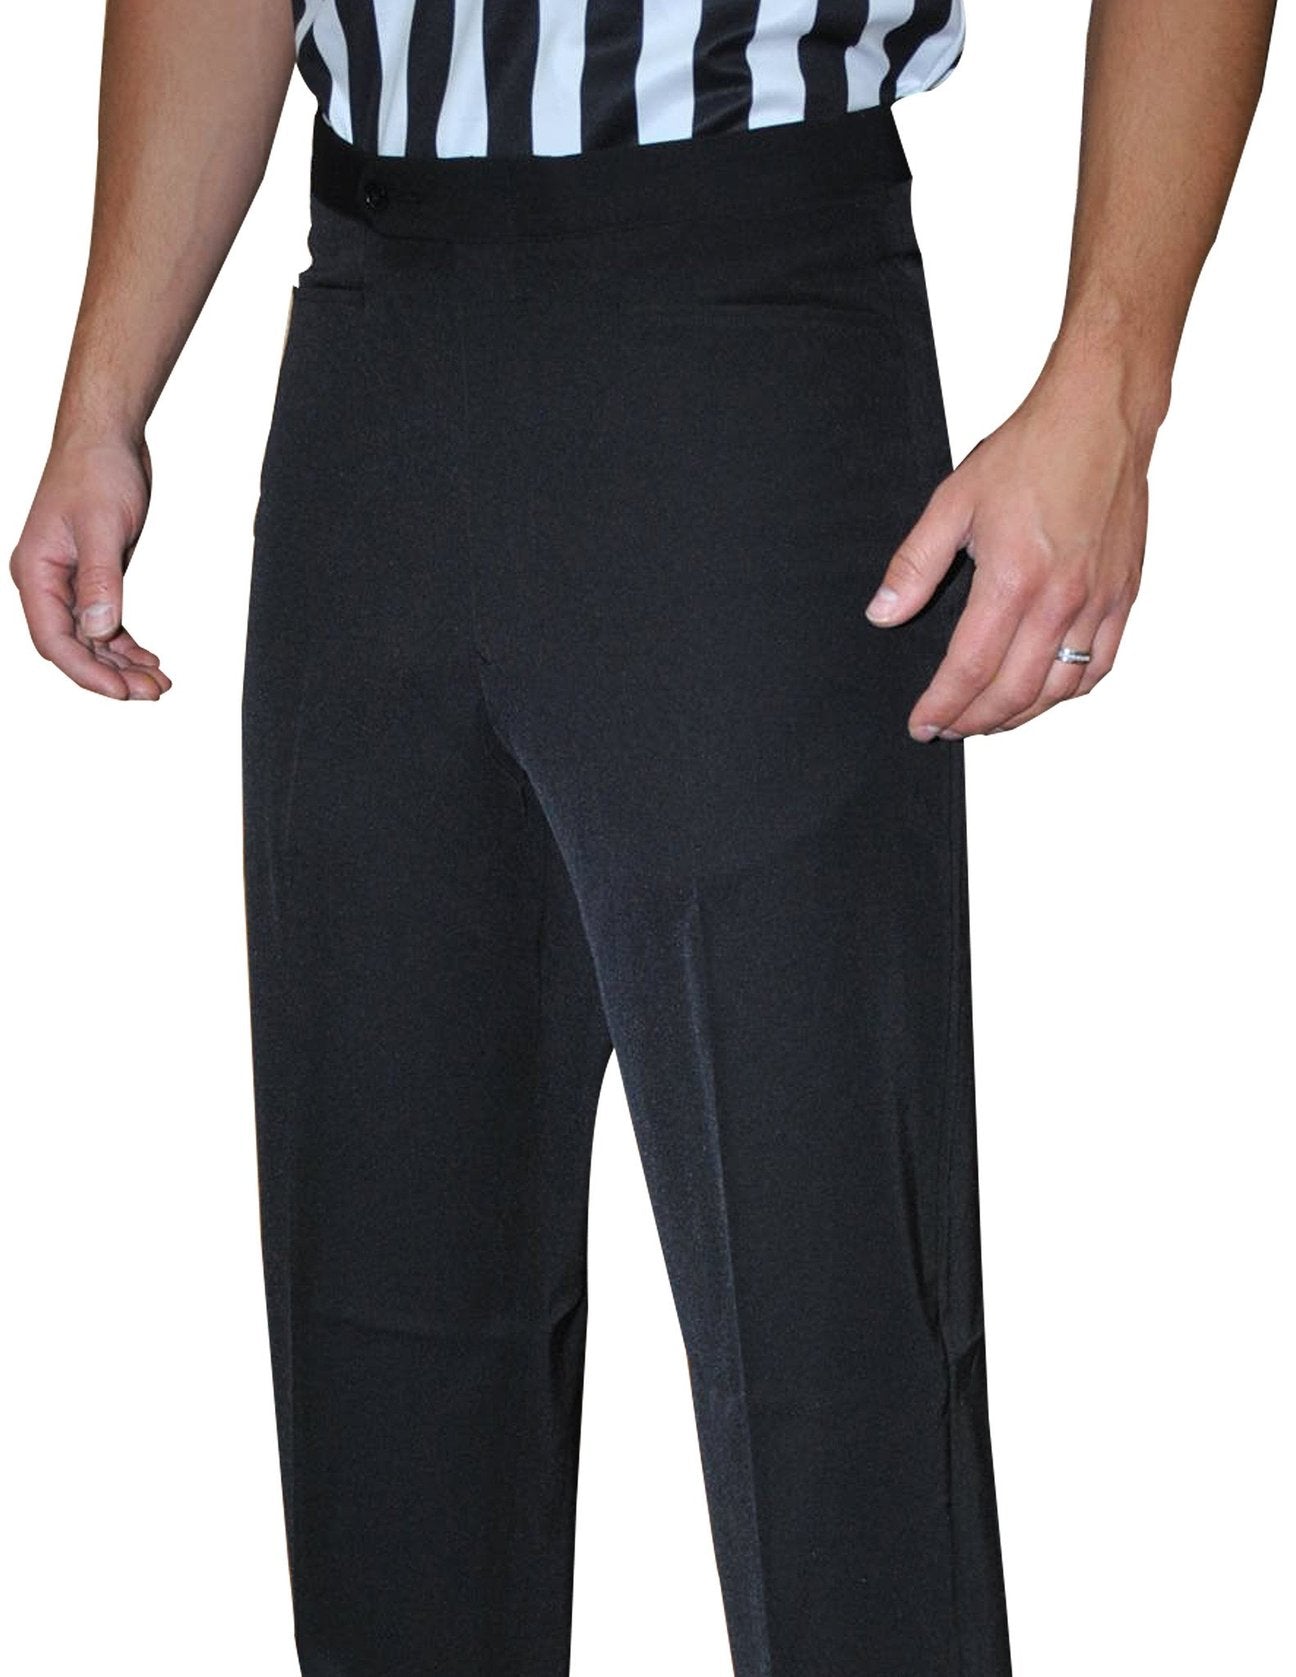 BKS290 - NEW TAPERED FIT PANTS Smitty 4-Way Stretch Flat Front